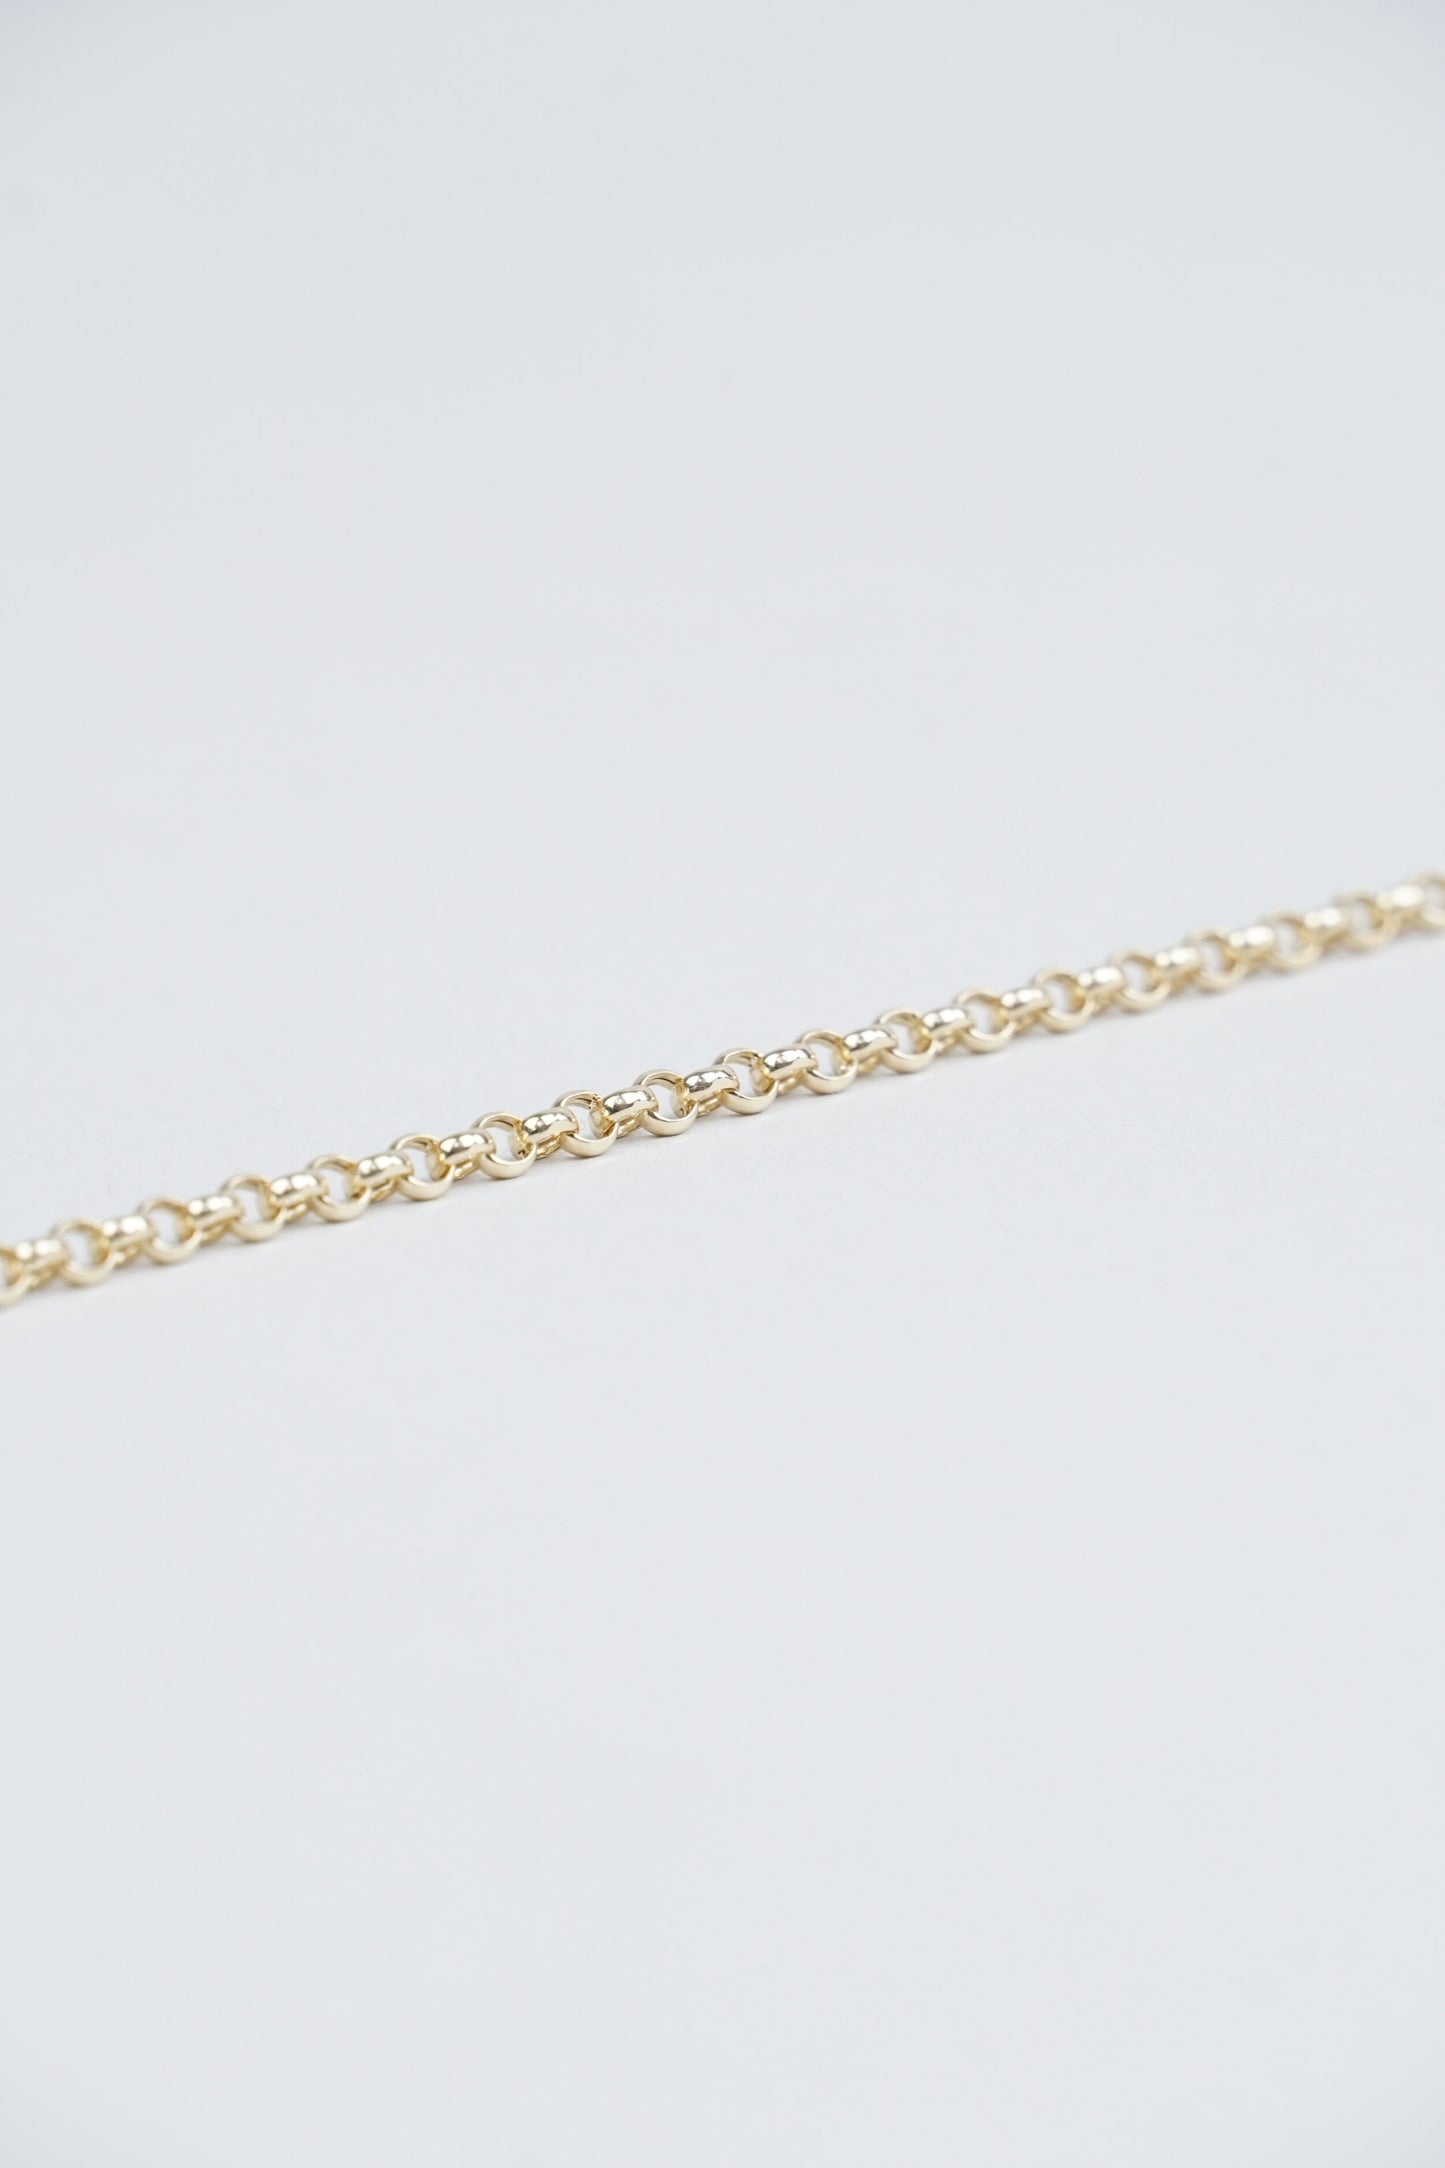 22" Rolo - 14k Yellow Gold